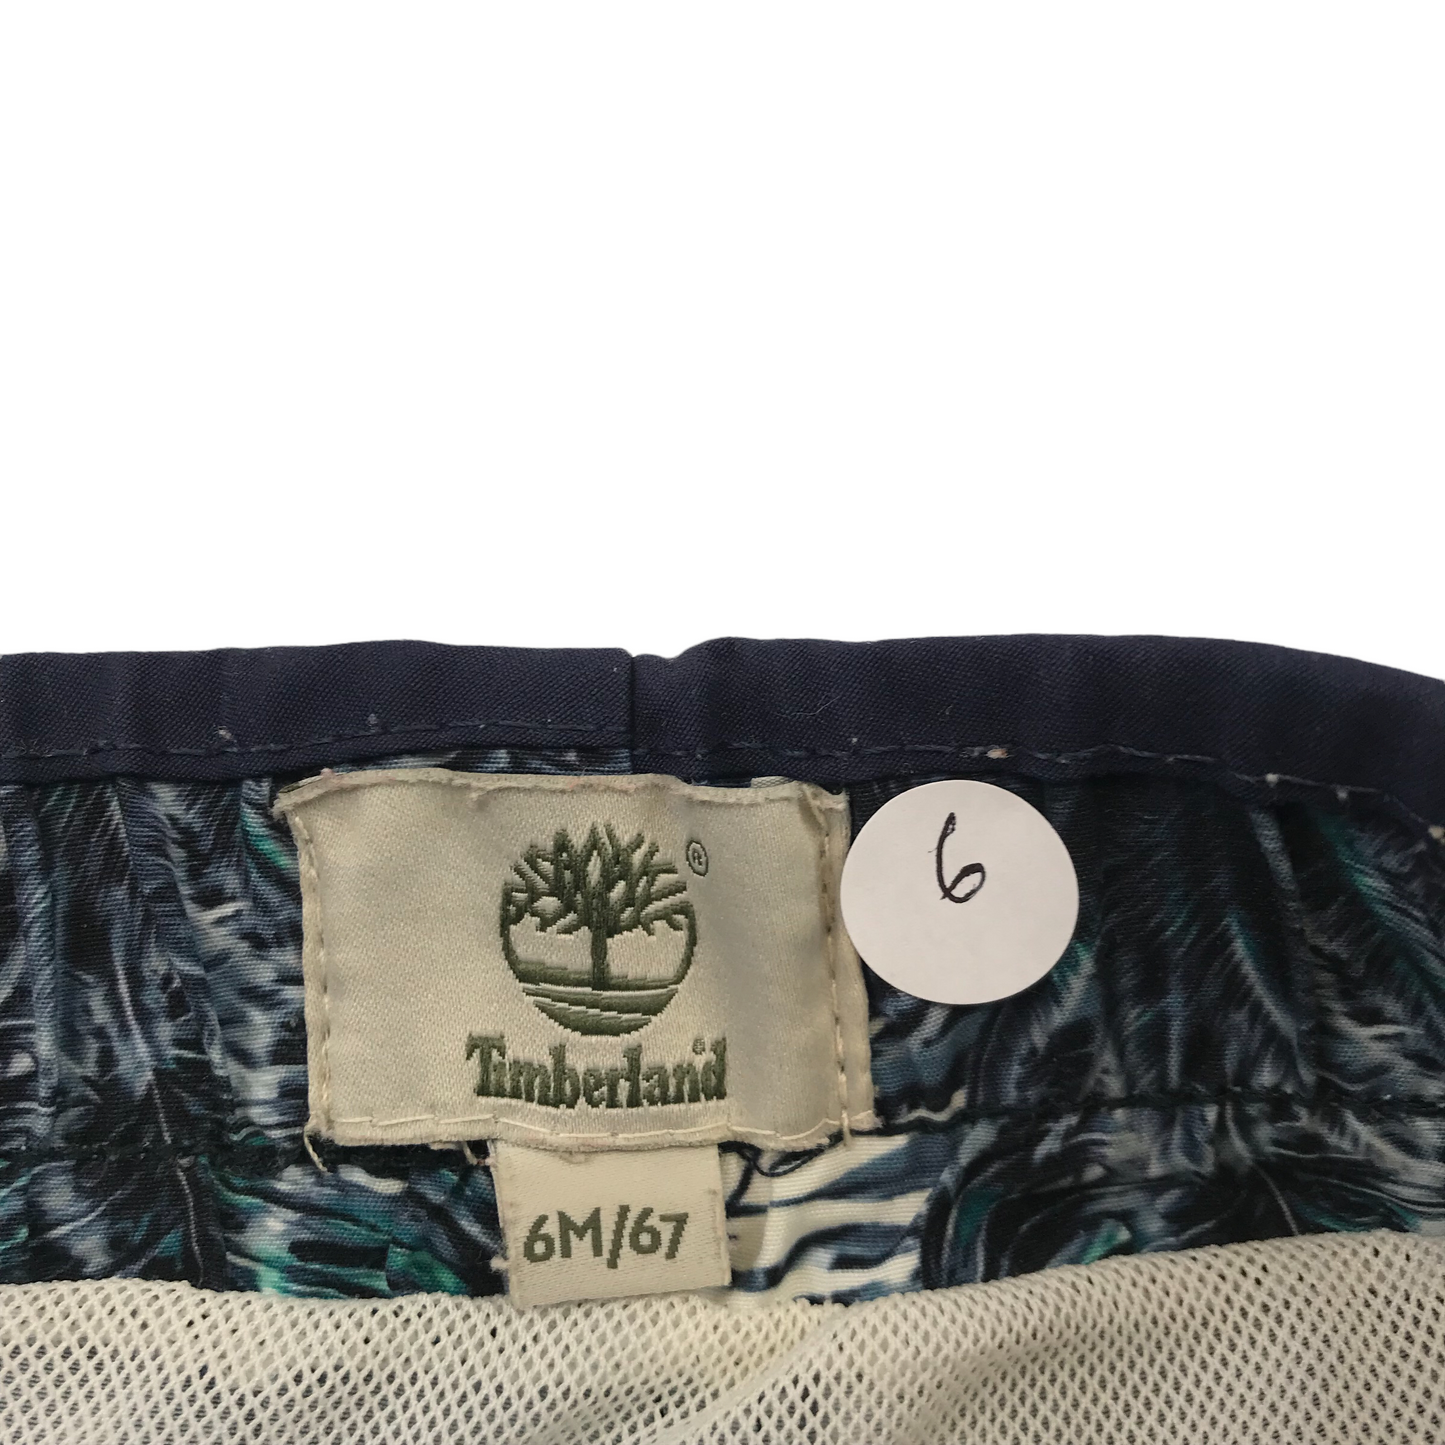 Timberland Leafy Parrot Swim Trunks Age 6